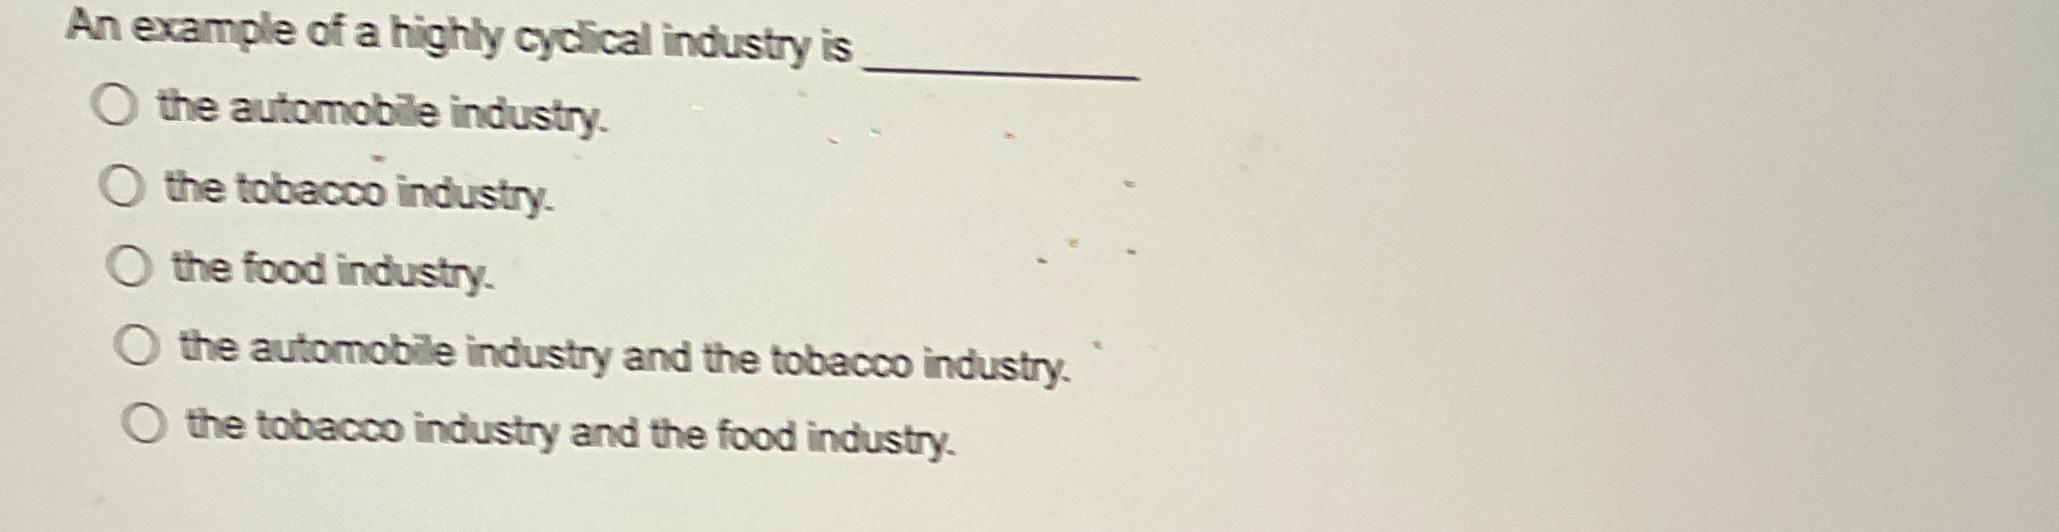 An example of a highly cyclical industry is the automobile industry. O the tobacco industry. O the food